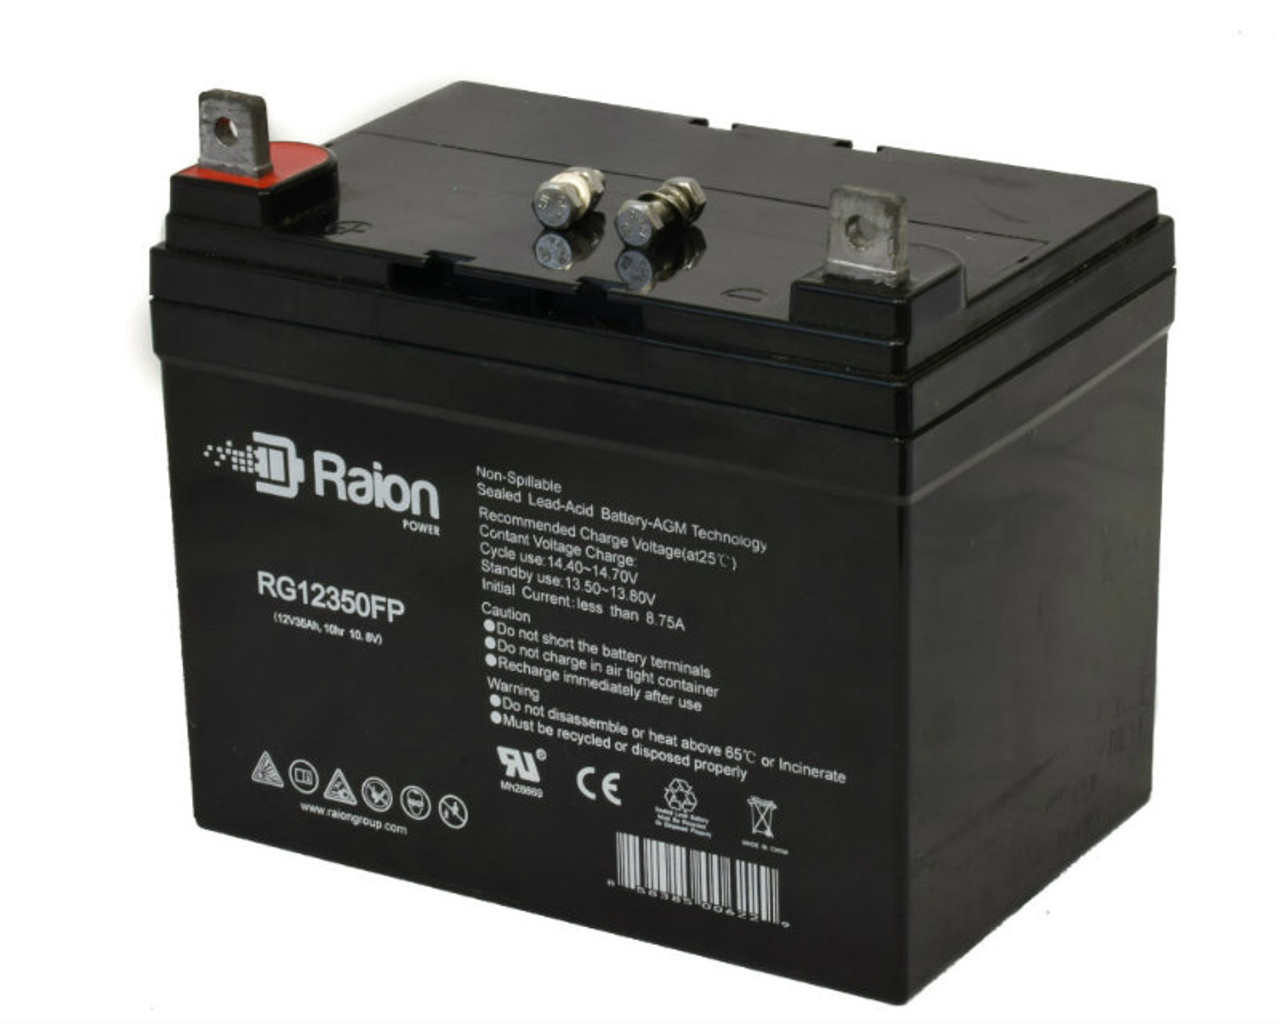 Raion Power Replacement 12V 35Ah RG12350FP Battery for Yard Man X614G